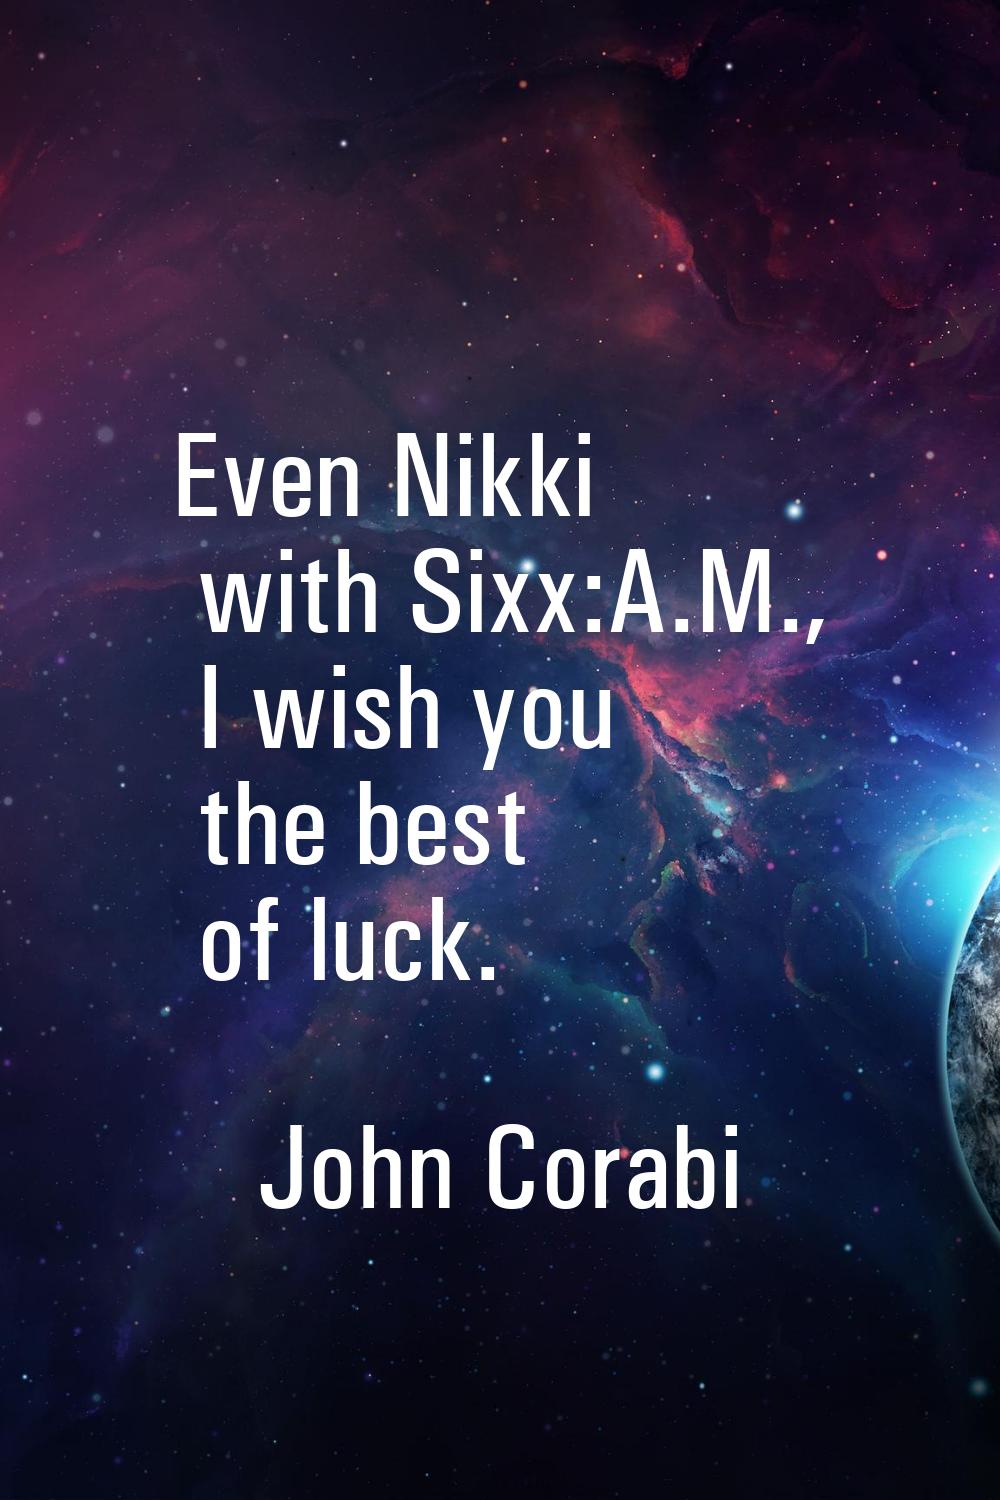 Even Nikki with Sixx:A.M., I wish you the best of luck.